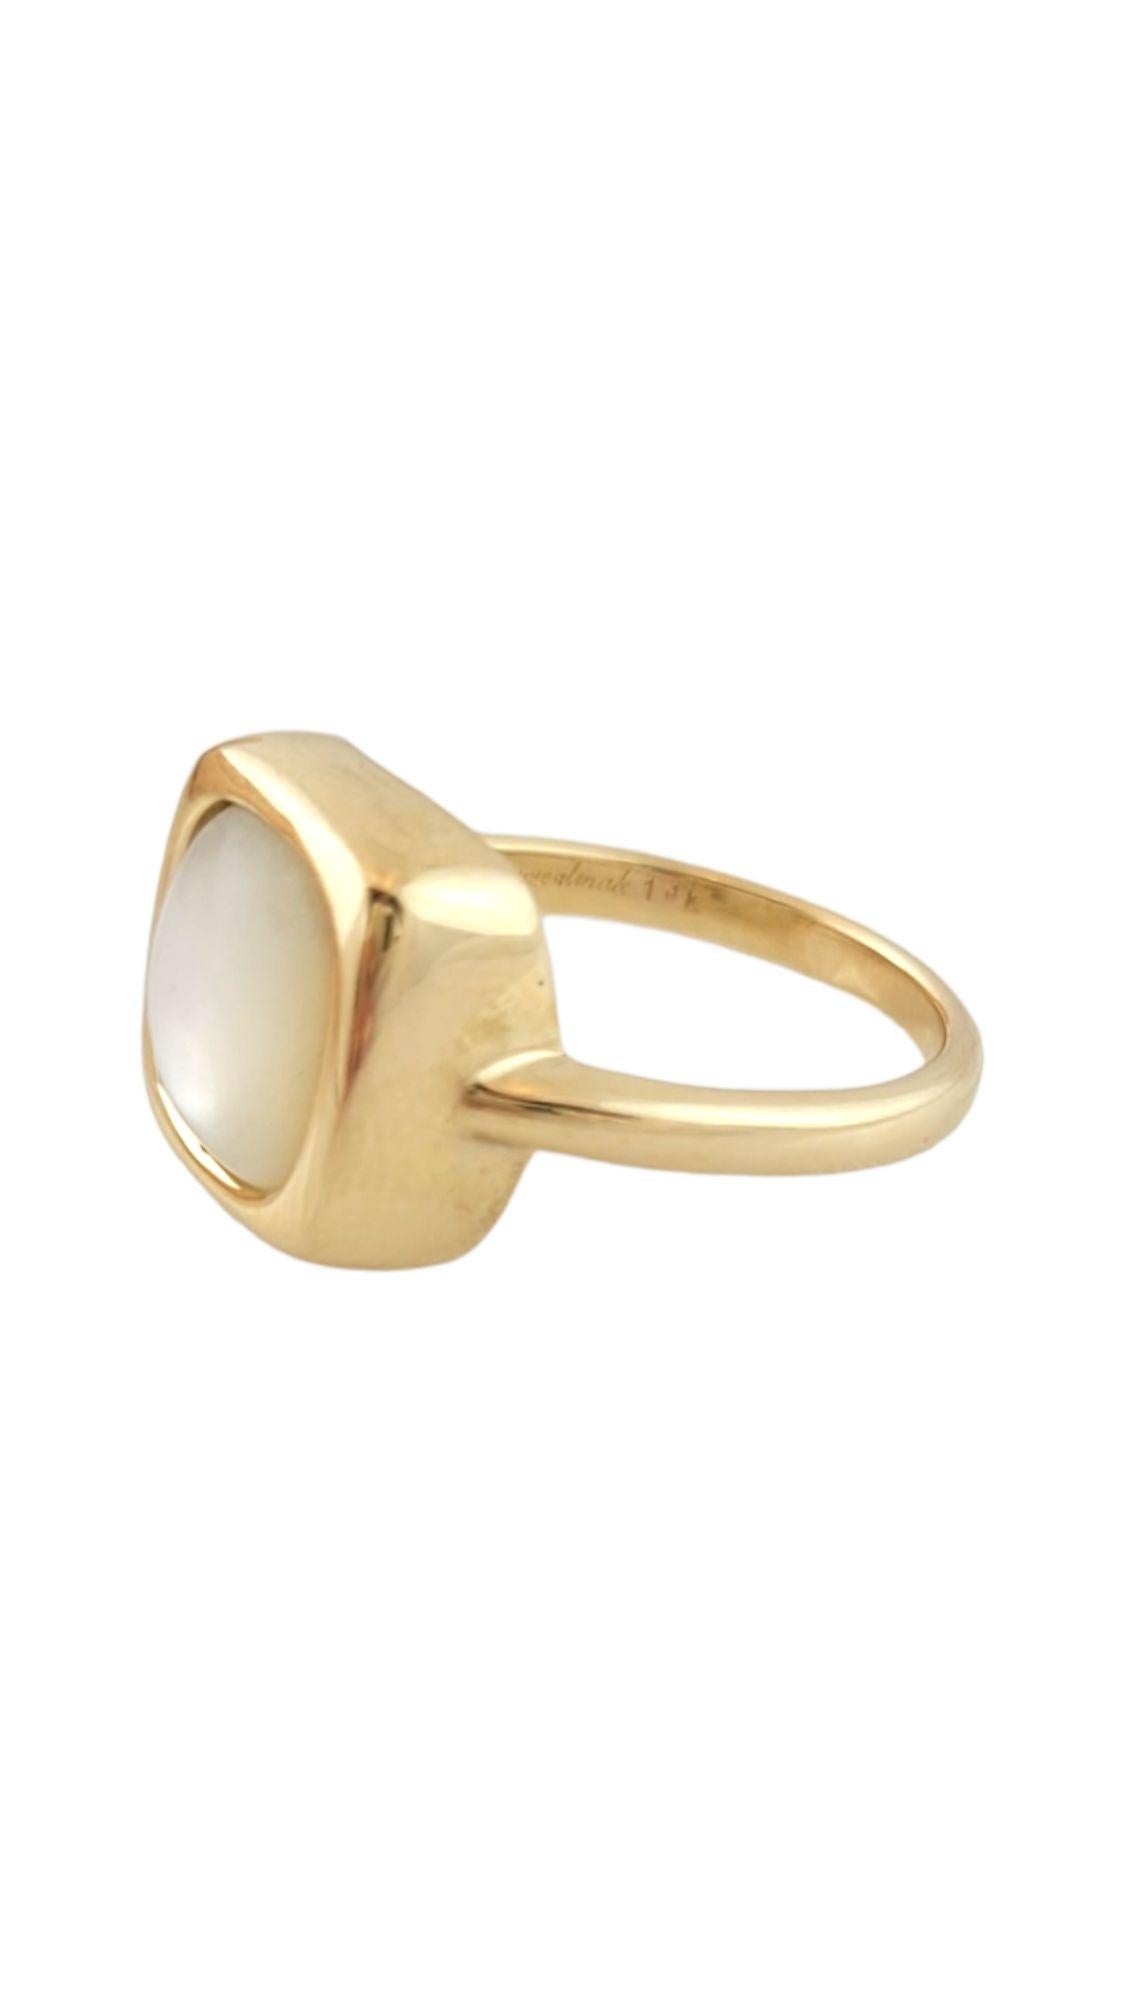 Vintage 14K Yellow Gold Moonstone Ring Size 7

This gorgeous 14K gold ring has a beautiful moonstone right in the center!

Ring size: 7

Shank: 2.2mm

Front: 13mm X 13mm X 5.1mm

Weight: 5.48 g/ 3.5 dwt

Hallmark: jewelmak 14K

Very good condition,